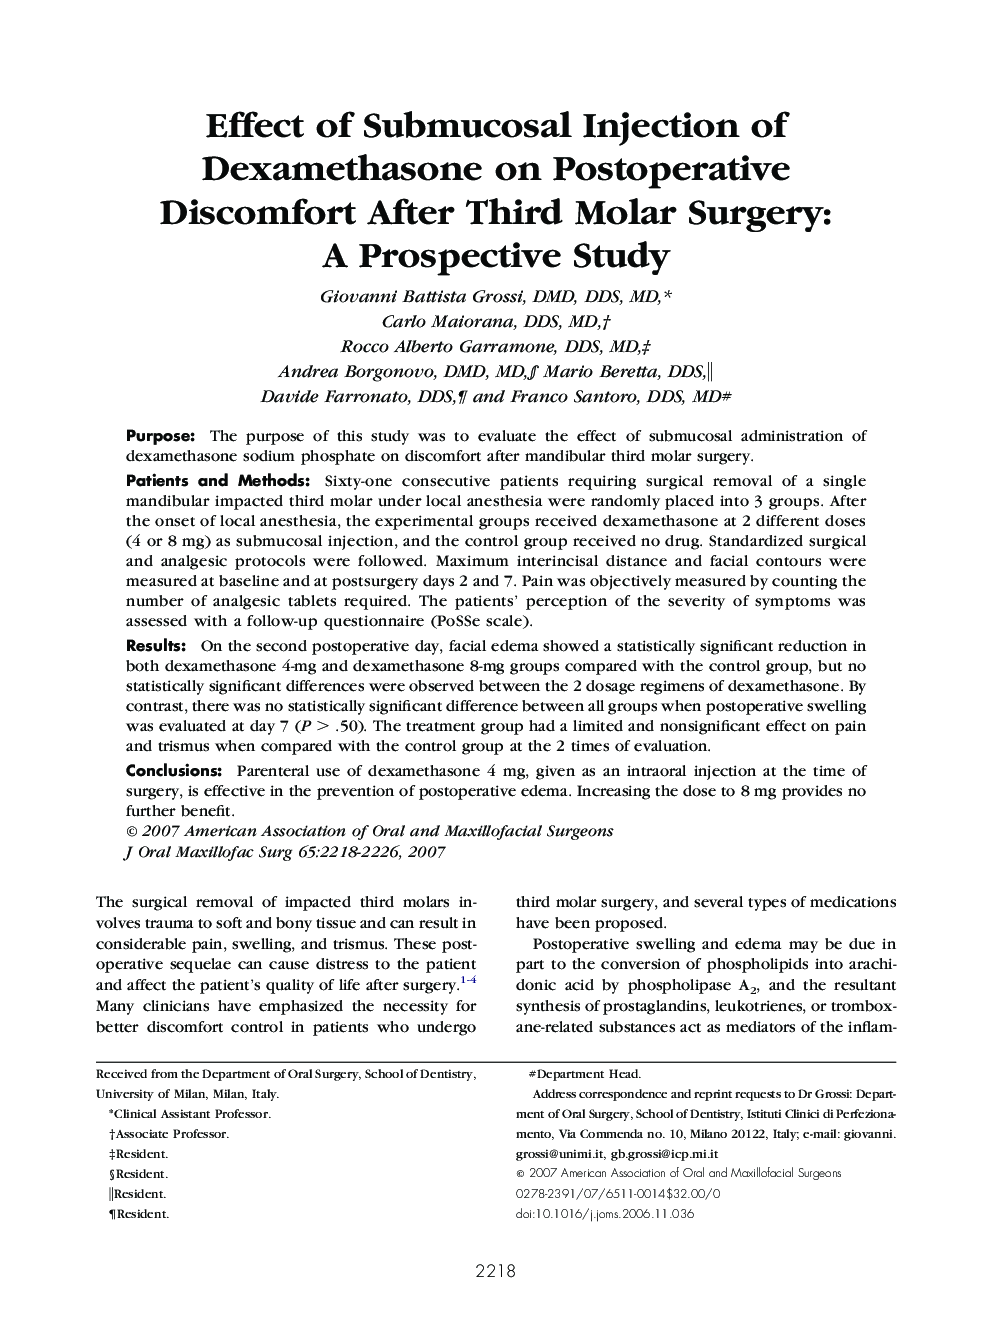 Effect of Submucosal Injection of Dexamethasone on Postoperative Discomfort After Third Molar Surgery: A Prospective Study